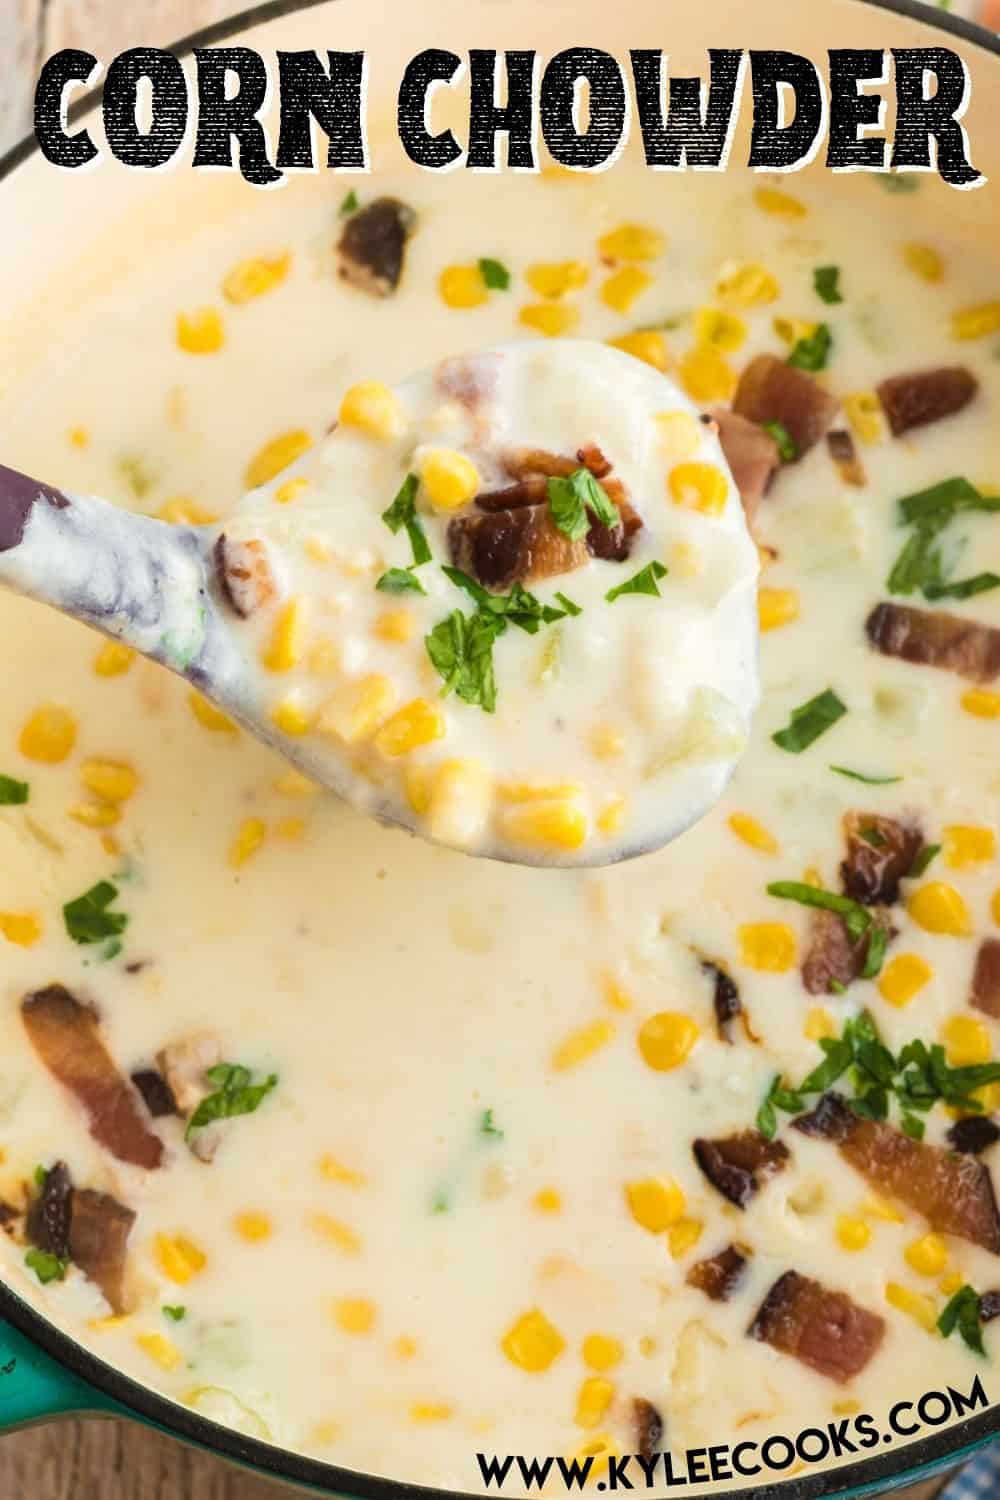 corn chowder with recipe name overlaid in text